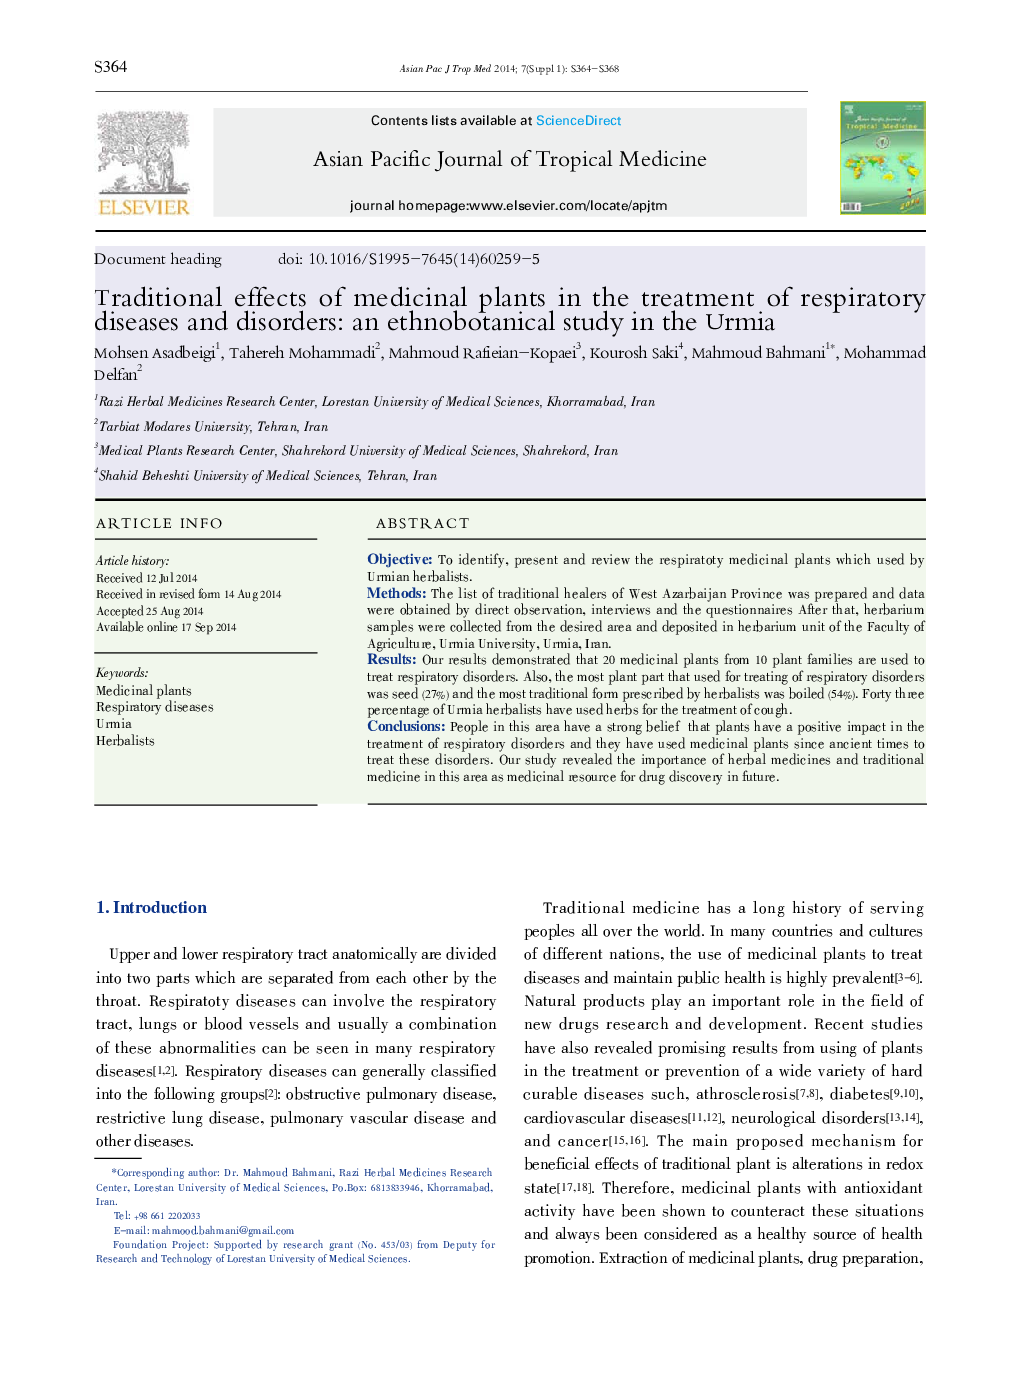 Traditional effects of medicinal plants in the treatment of respiratory diseases and disorders: an ethnobotanical study in the Urmia 